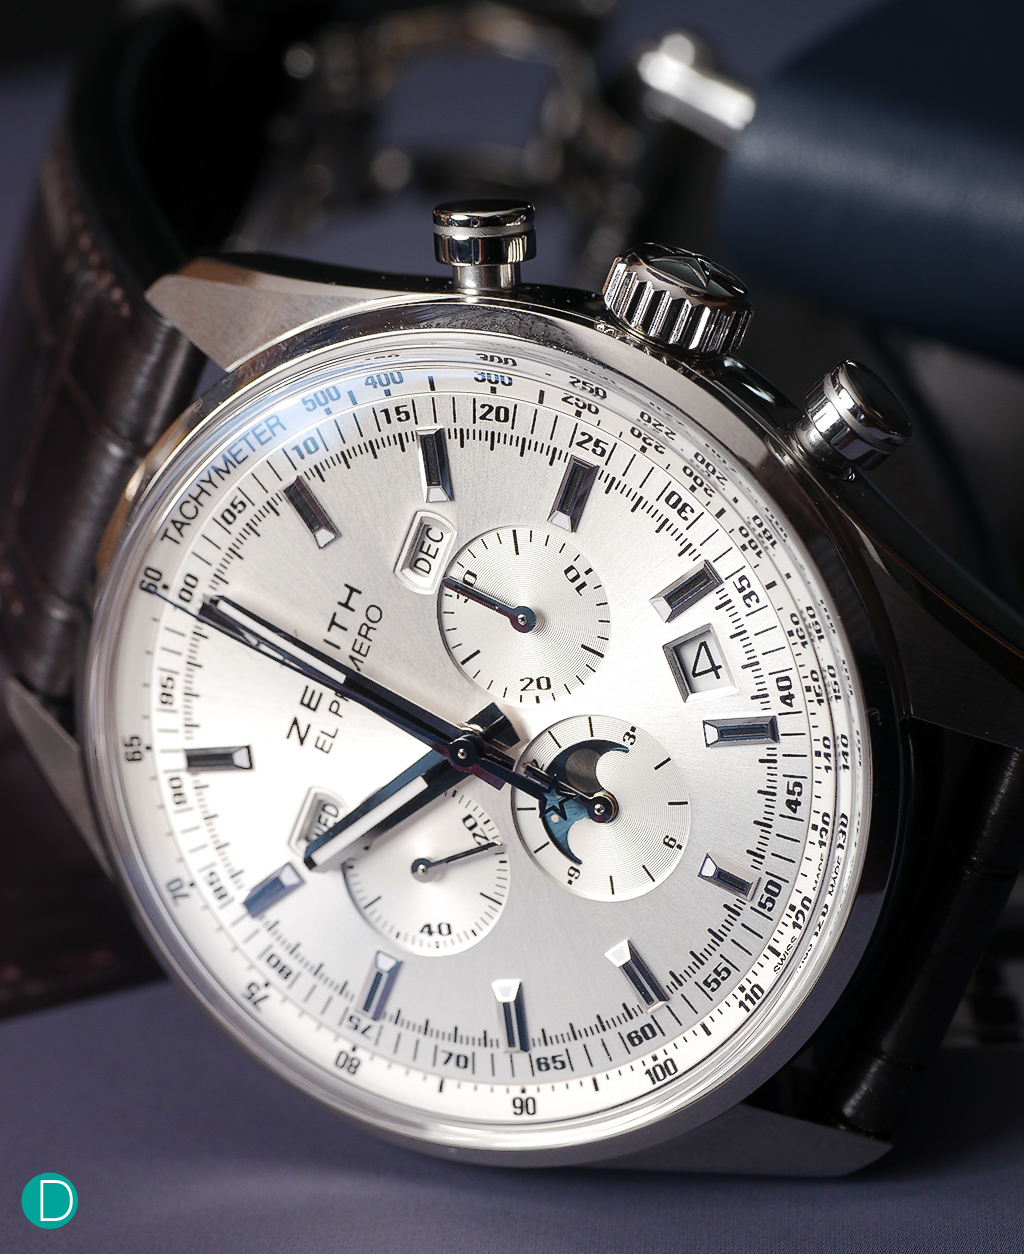 The Zenith El Primero. Probably one of the most iconic pieces in the Zenith lineup.